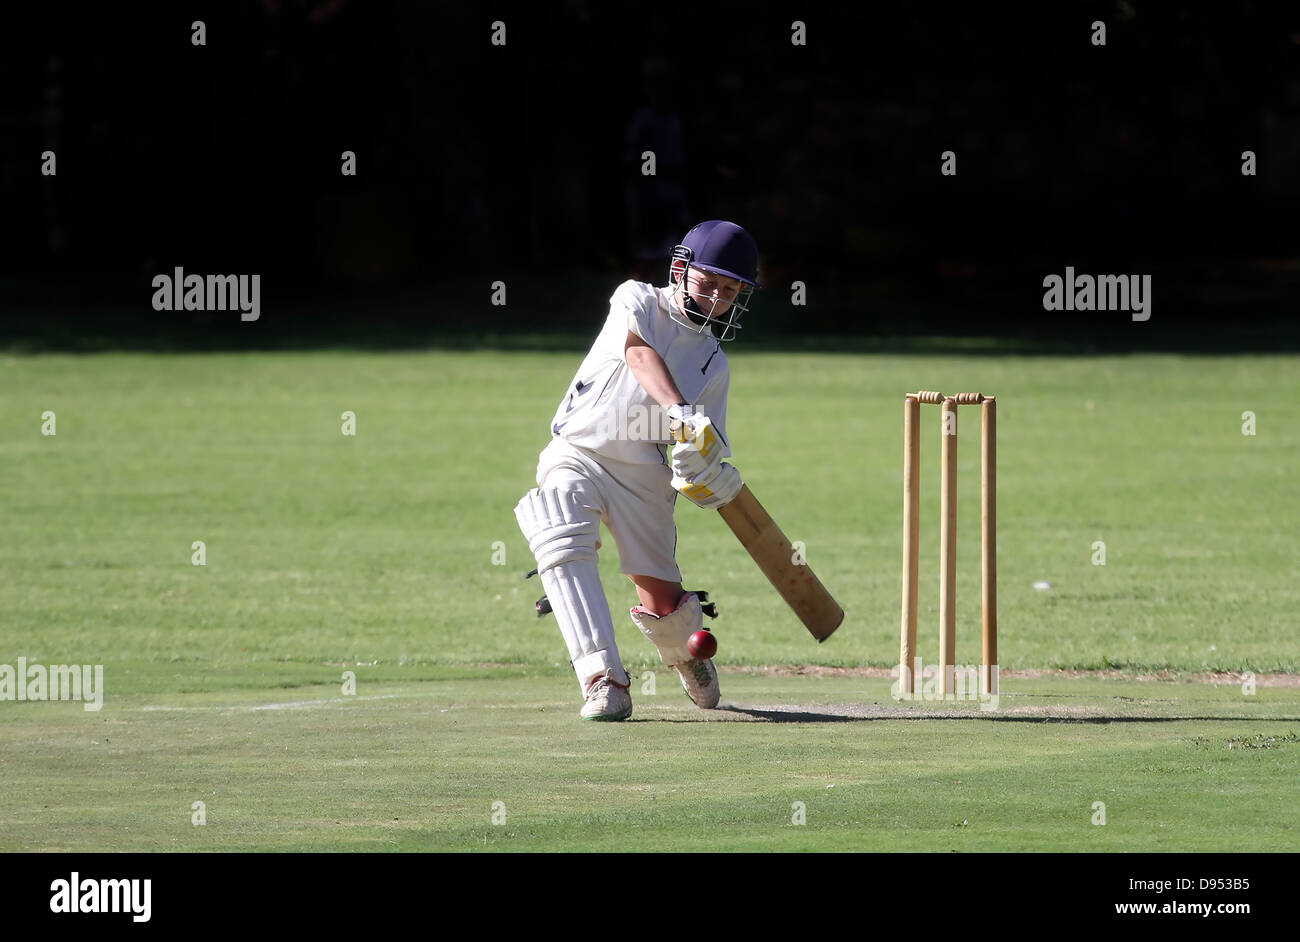 A young boy playing a straight drive cricket shot Stock Photo